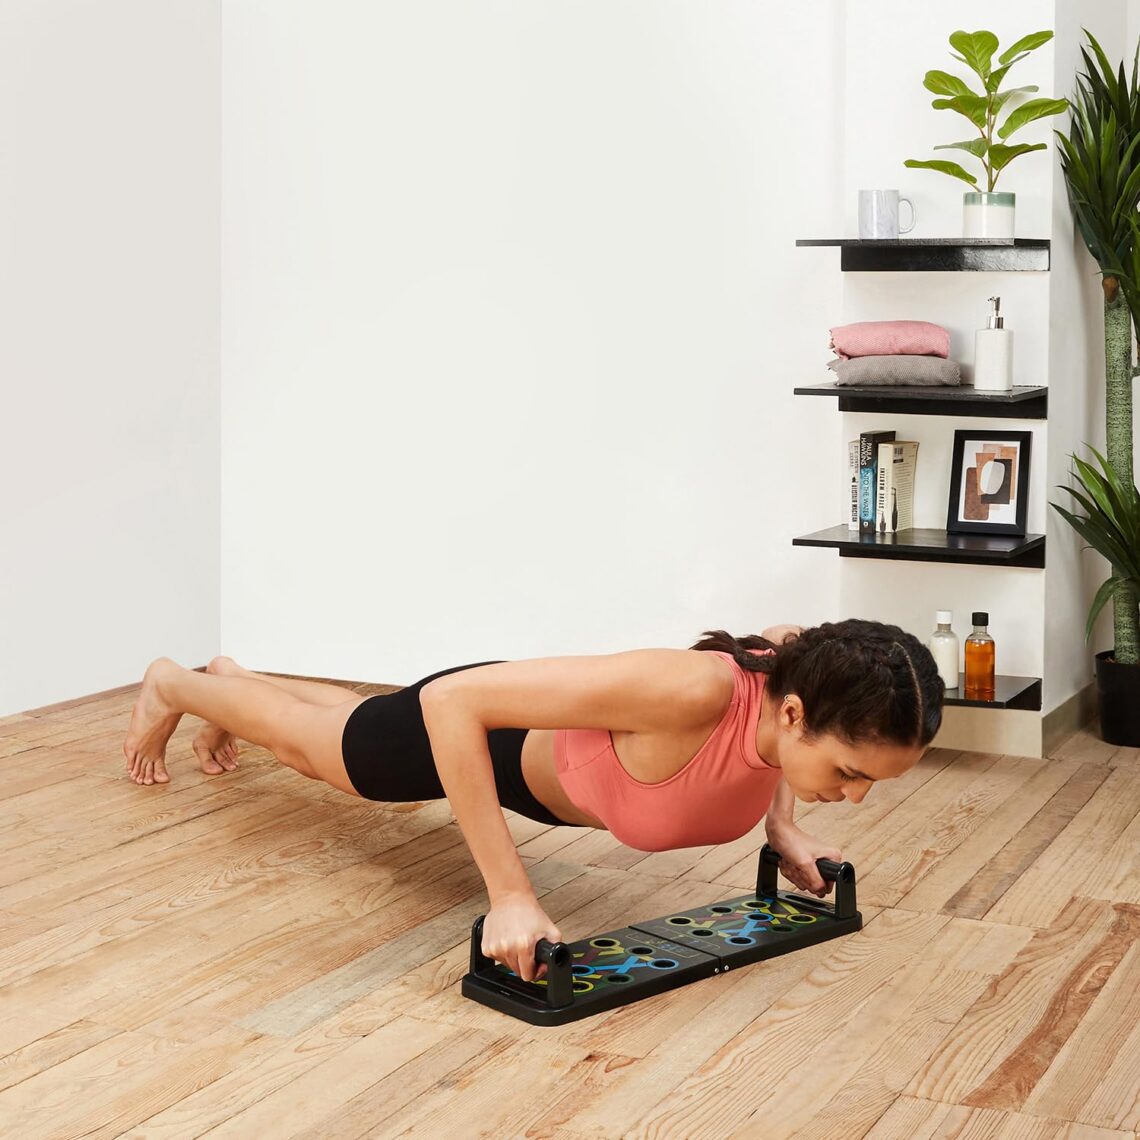 Symactive ABS Pushup Board